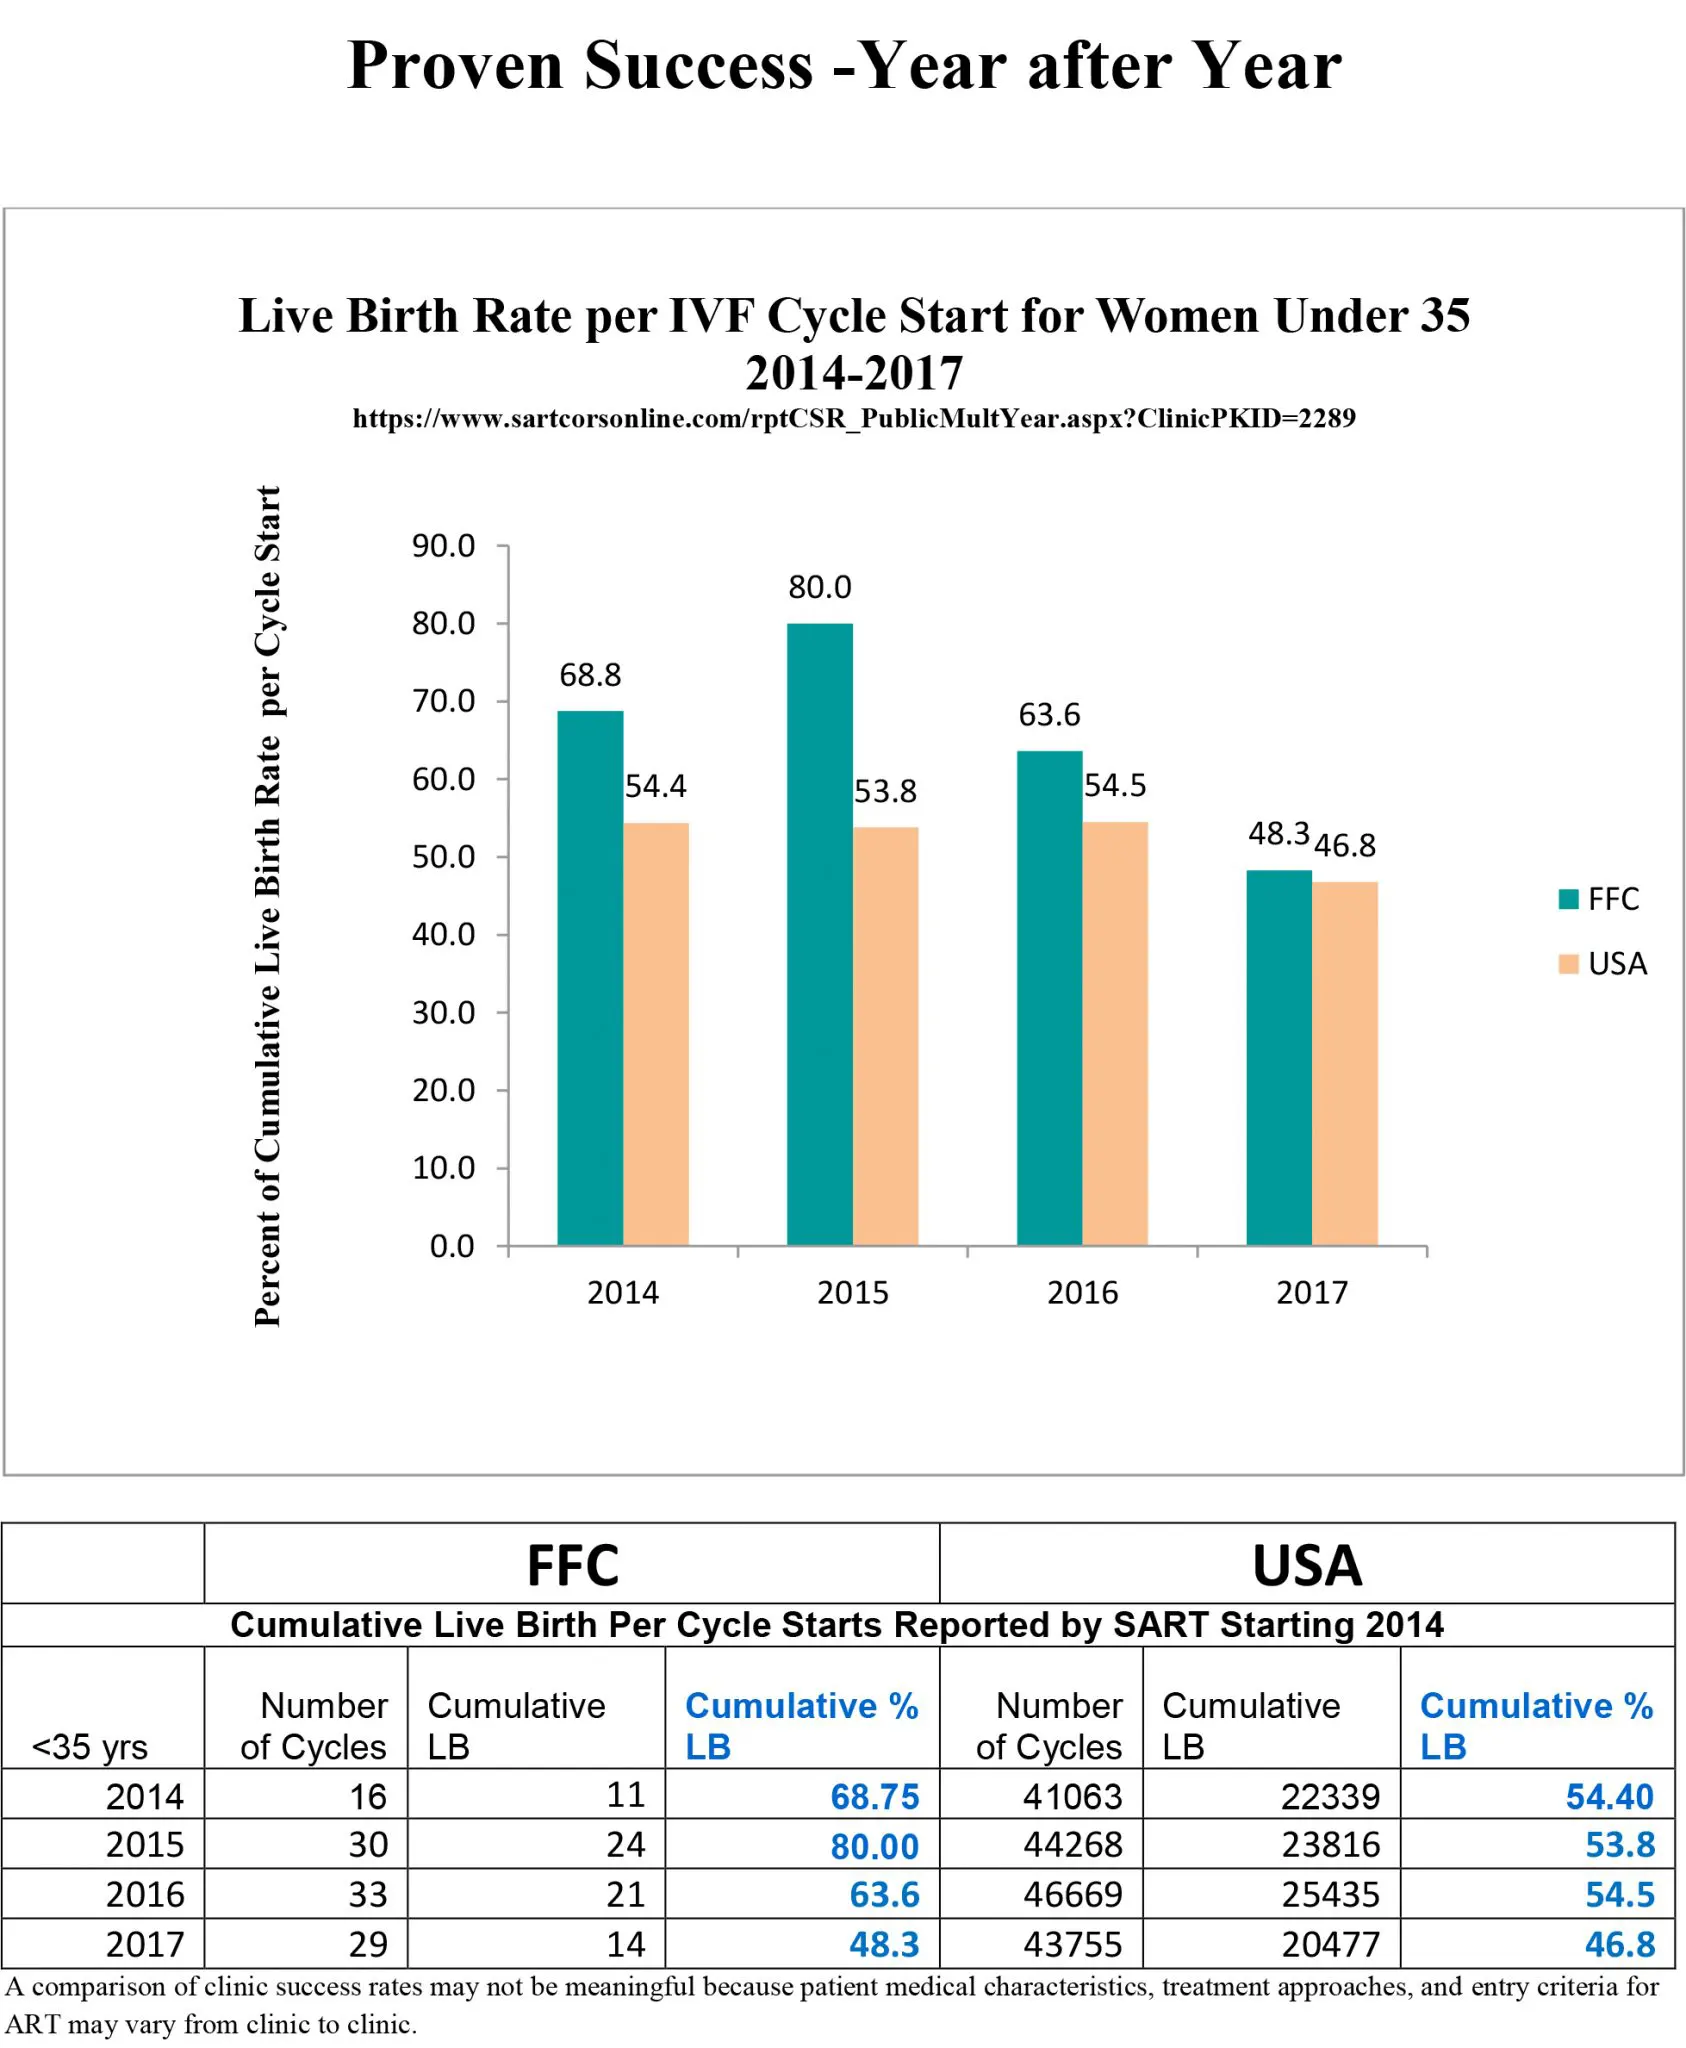 Live Birth Rate per IVF Cycle for Women Under 35 Graph